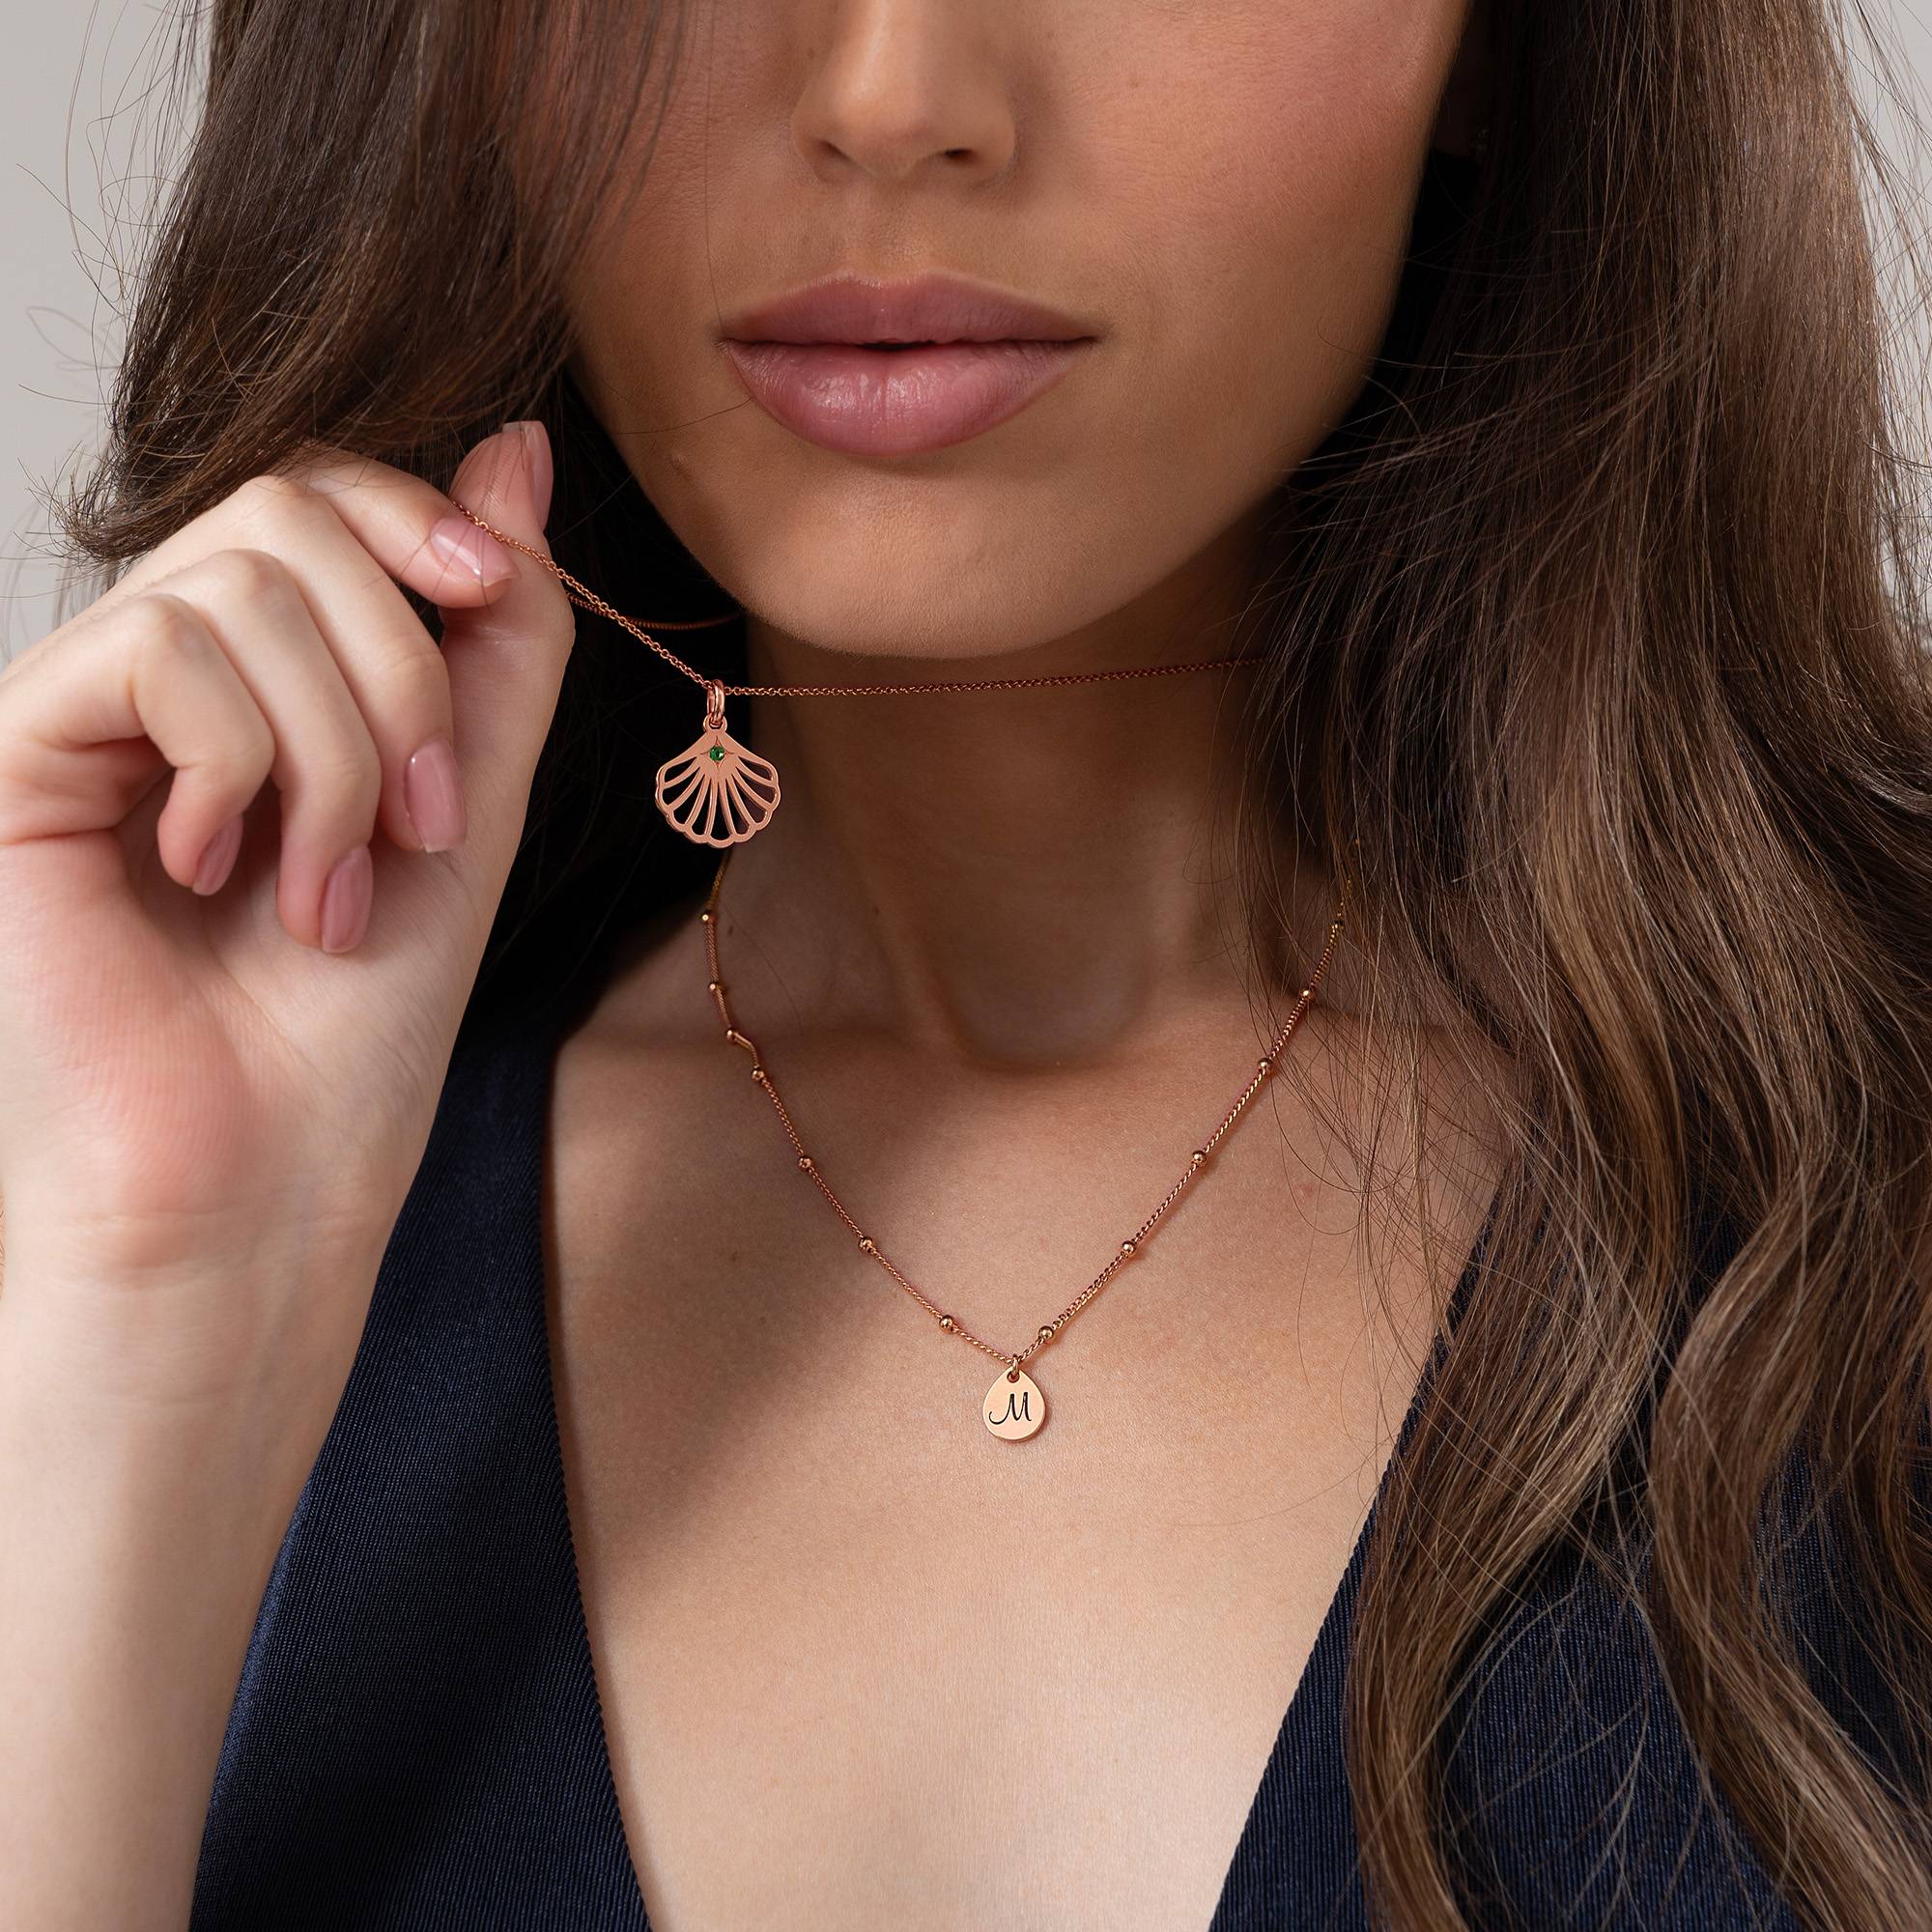 Rose Necklace with Initial charms in Rose Gold Plating - MYKA